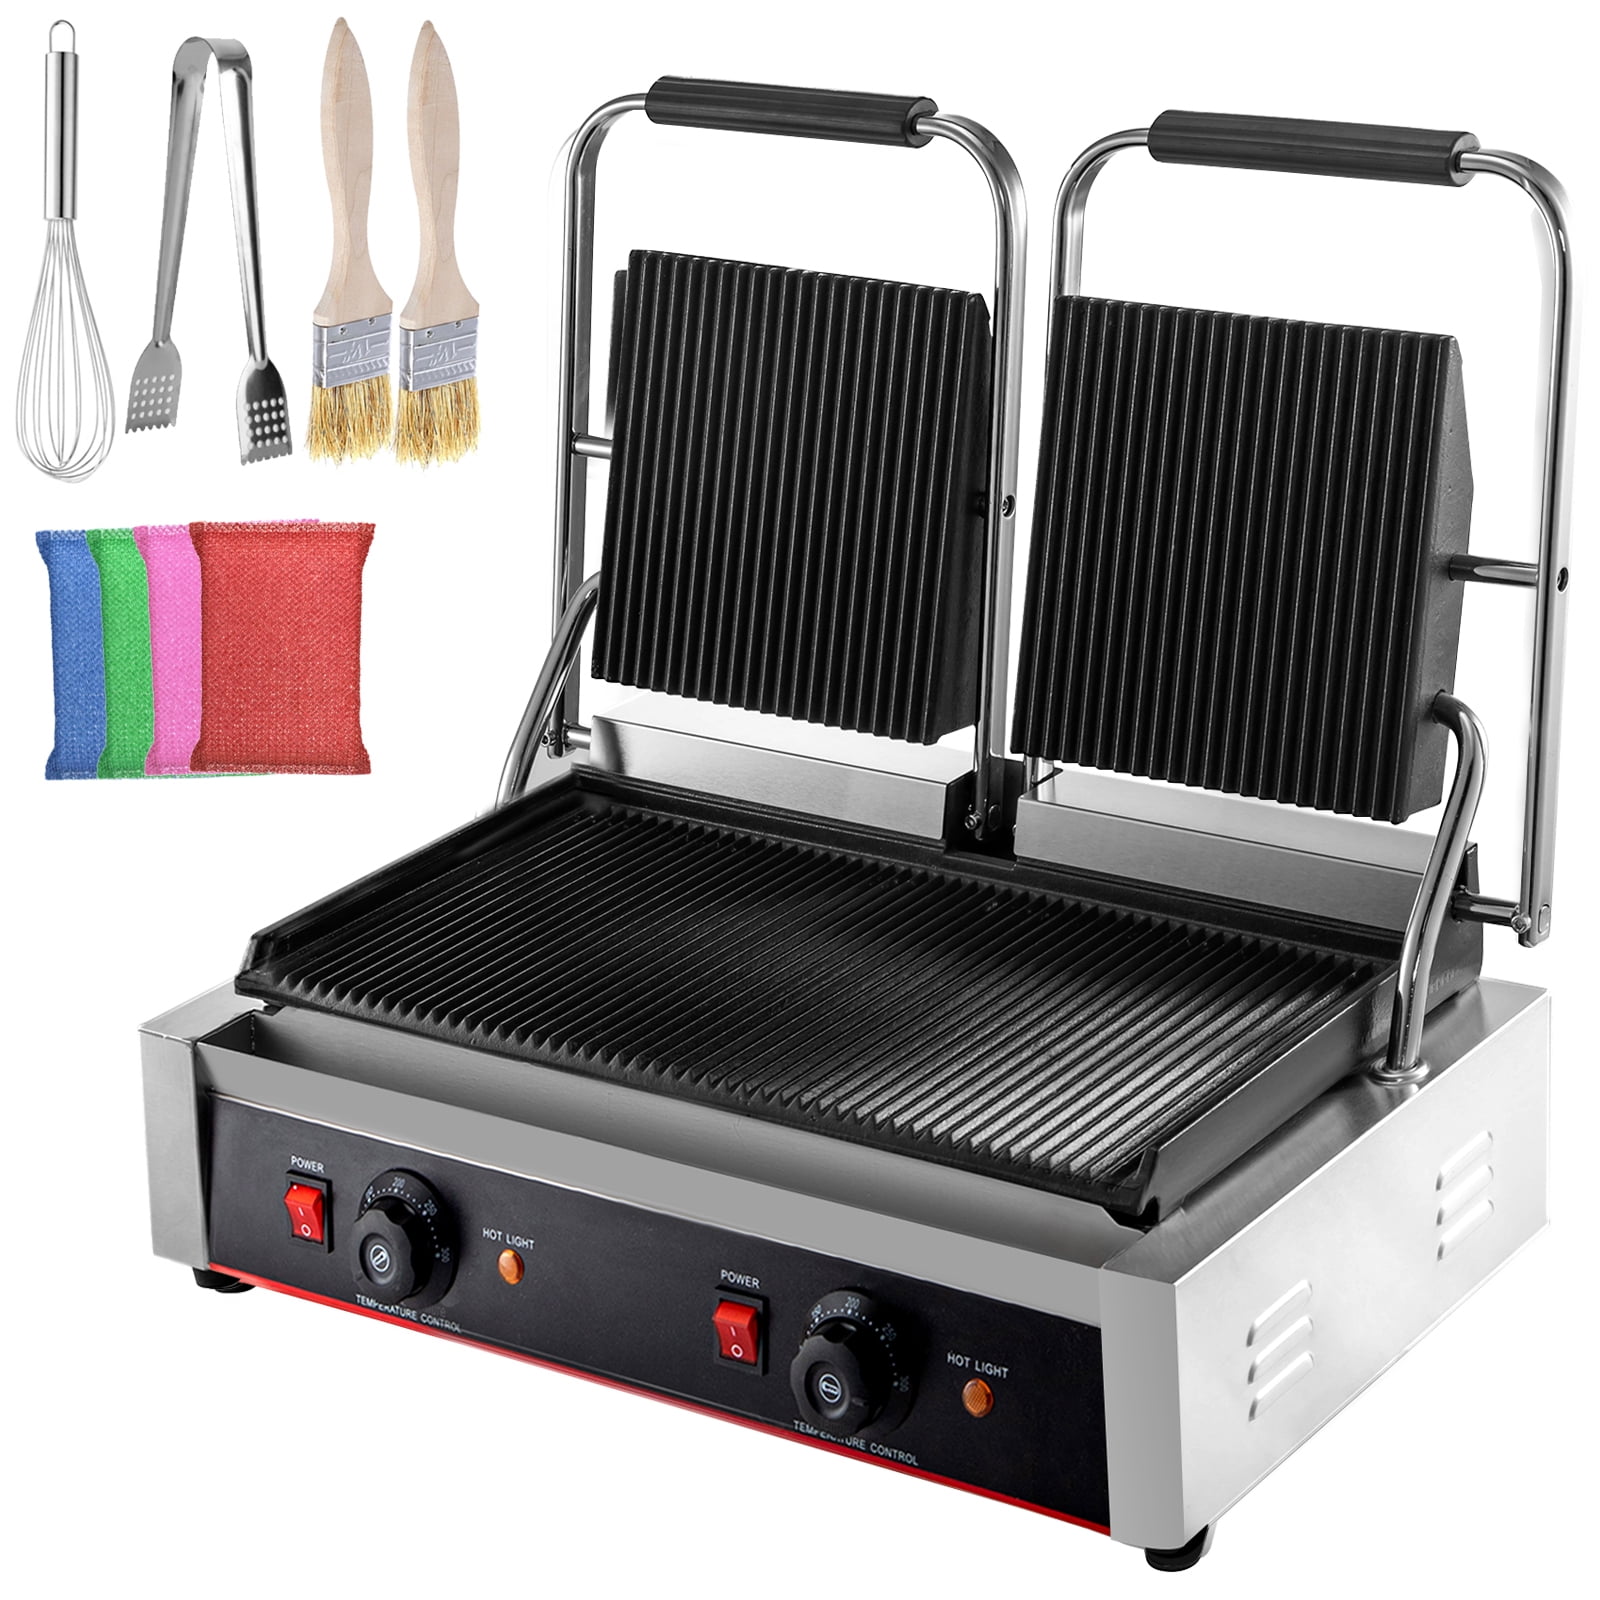 Sandwich Maker, 110V Commercial 2Pcs Sandwich Makers and Panini Presses  with Non-stick Plates, LED Indicator Lights Sandwich Toaster for Bakeries